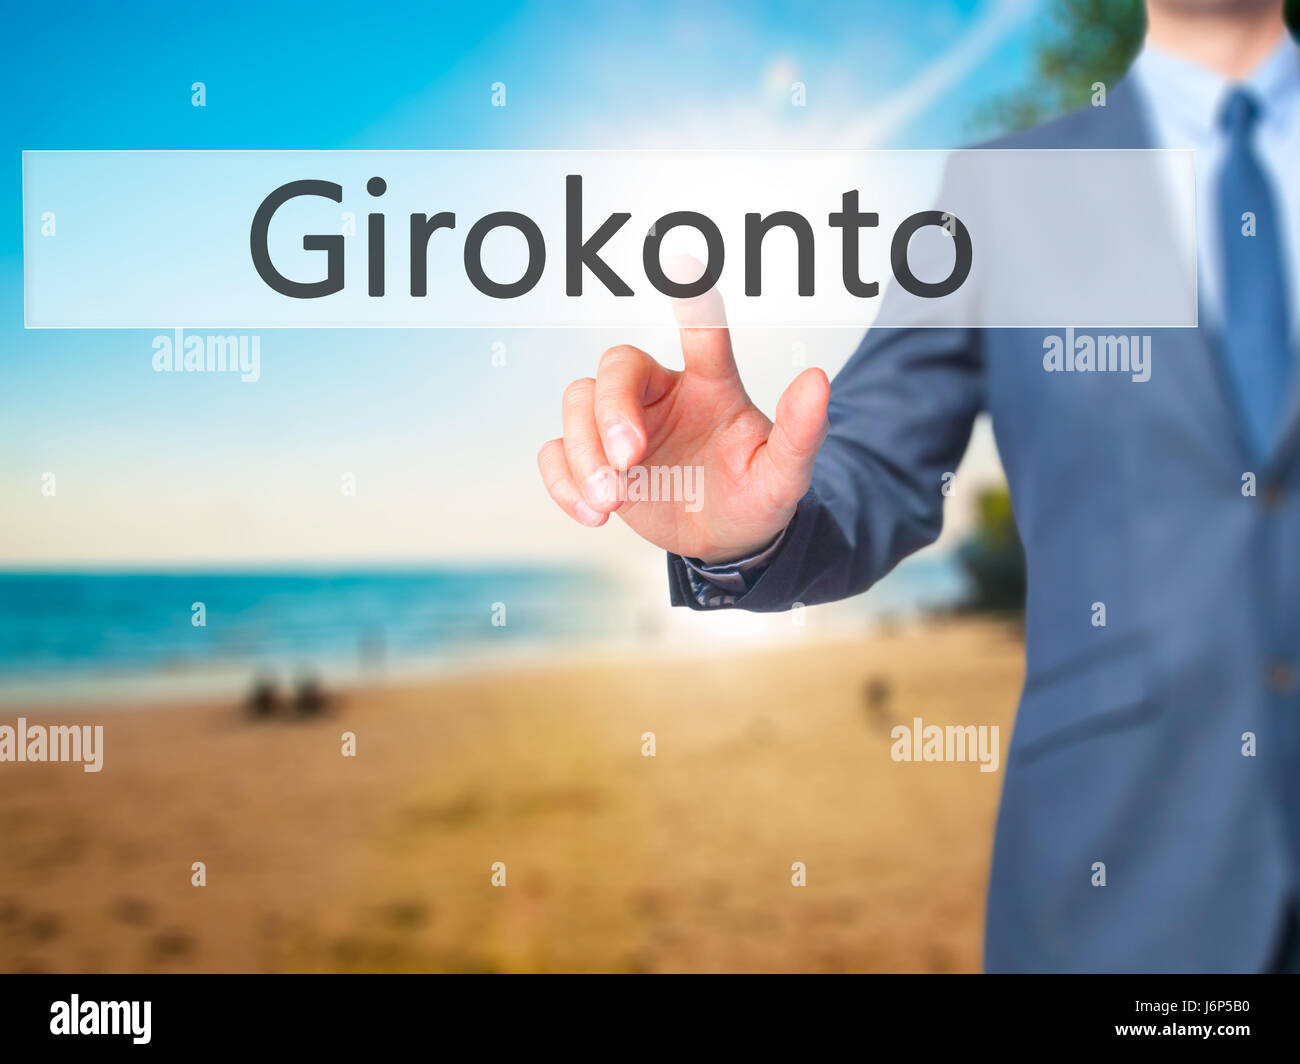 Girokonto (Checking Account) - Businessman hand pressing button on touch screen interface. Business, technology, internet concept. Stock Photo Stock Photo